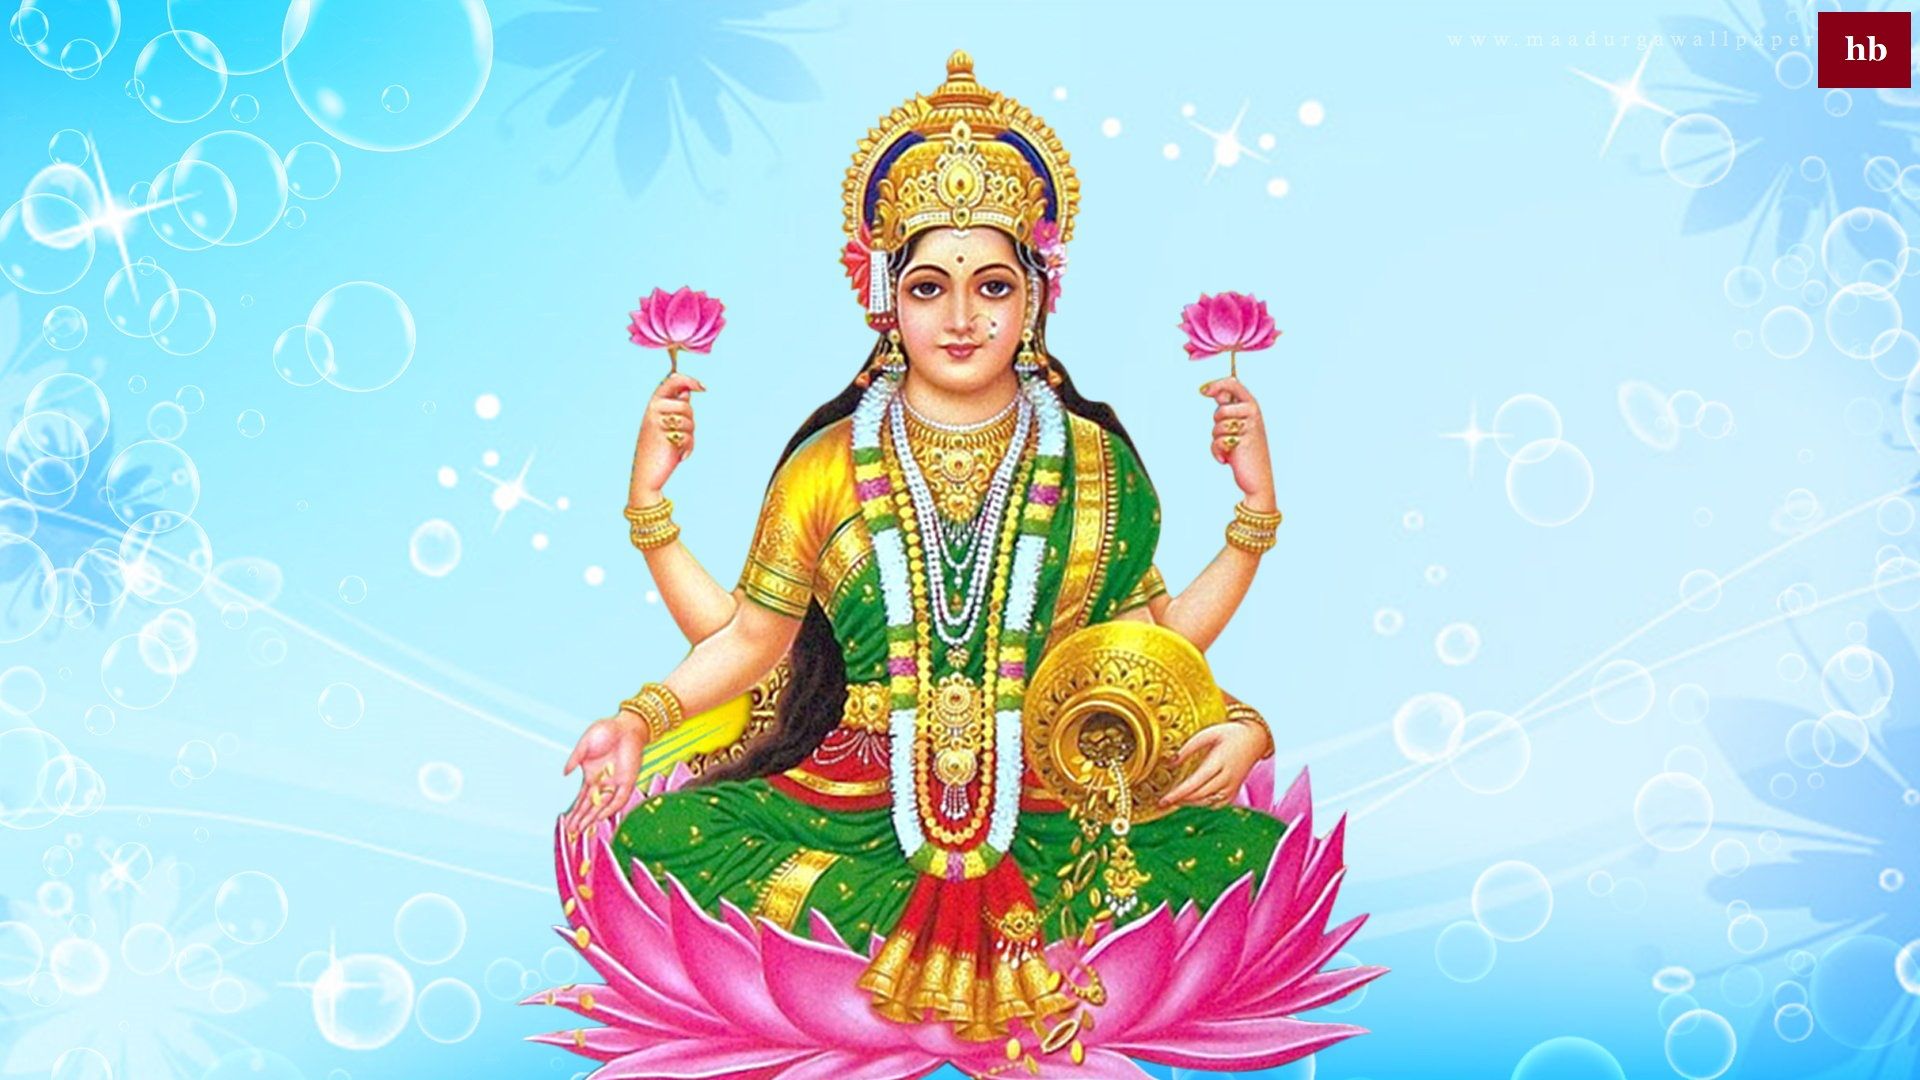 Goddess Lakshmi story and about her birth